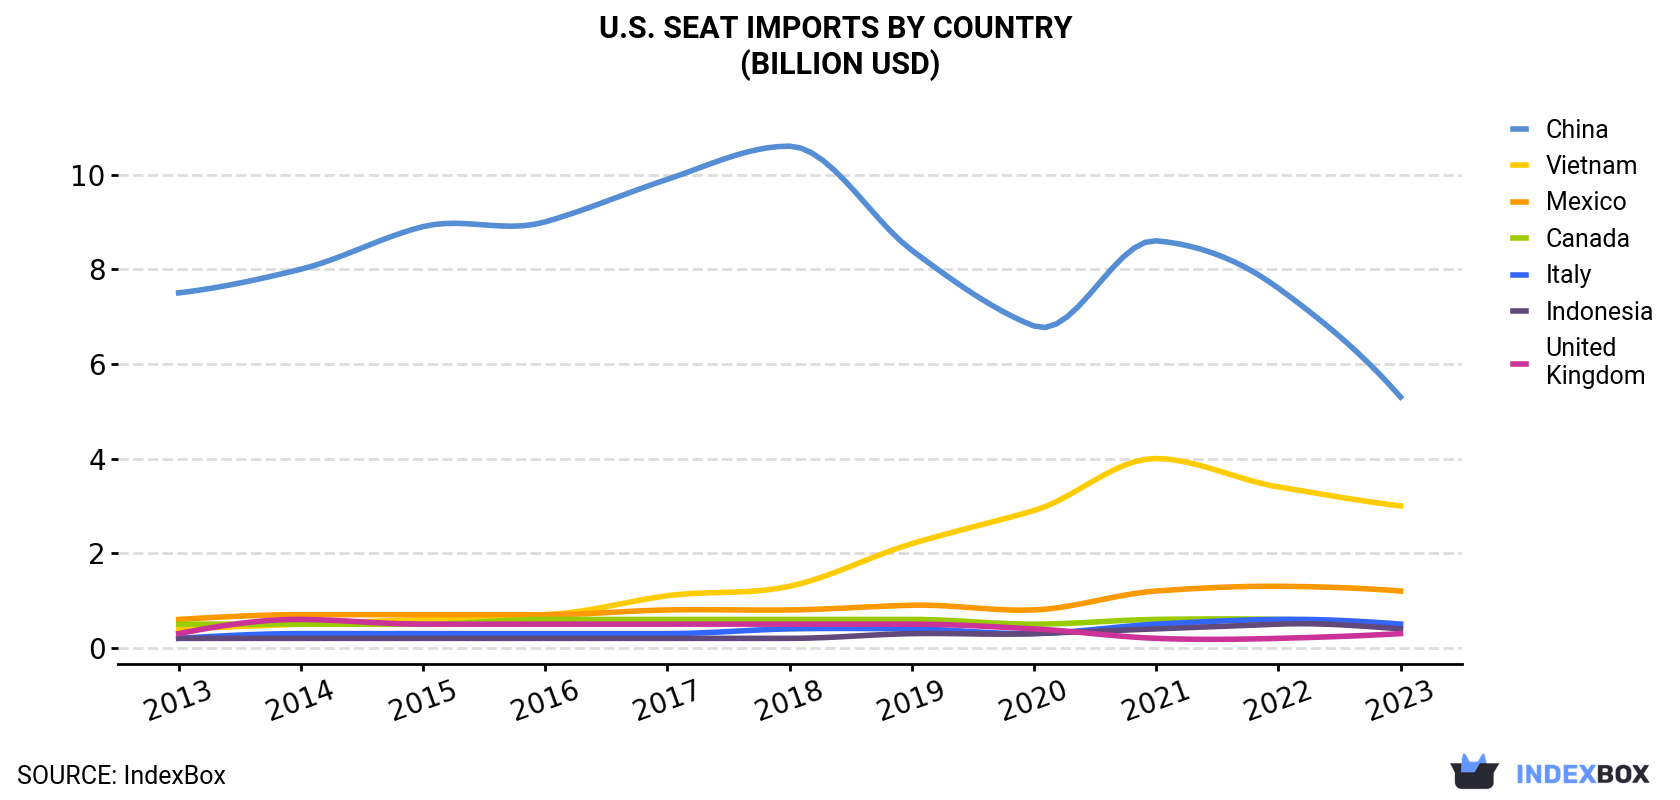 U.S. Seat Imports By Country (Billion USD)